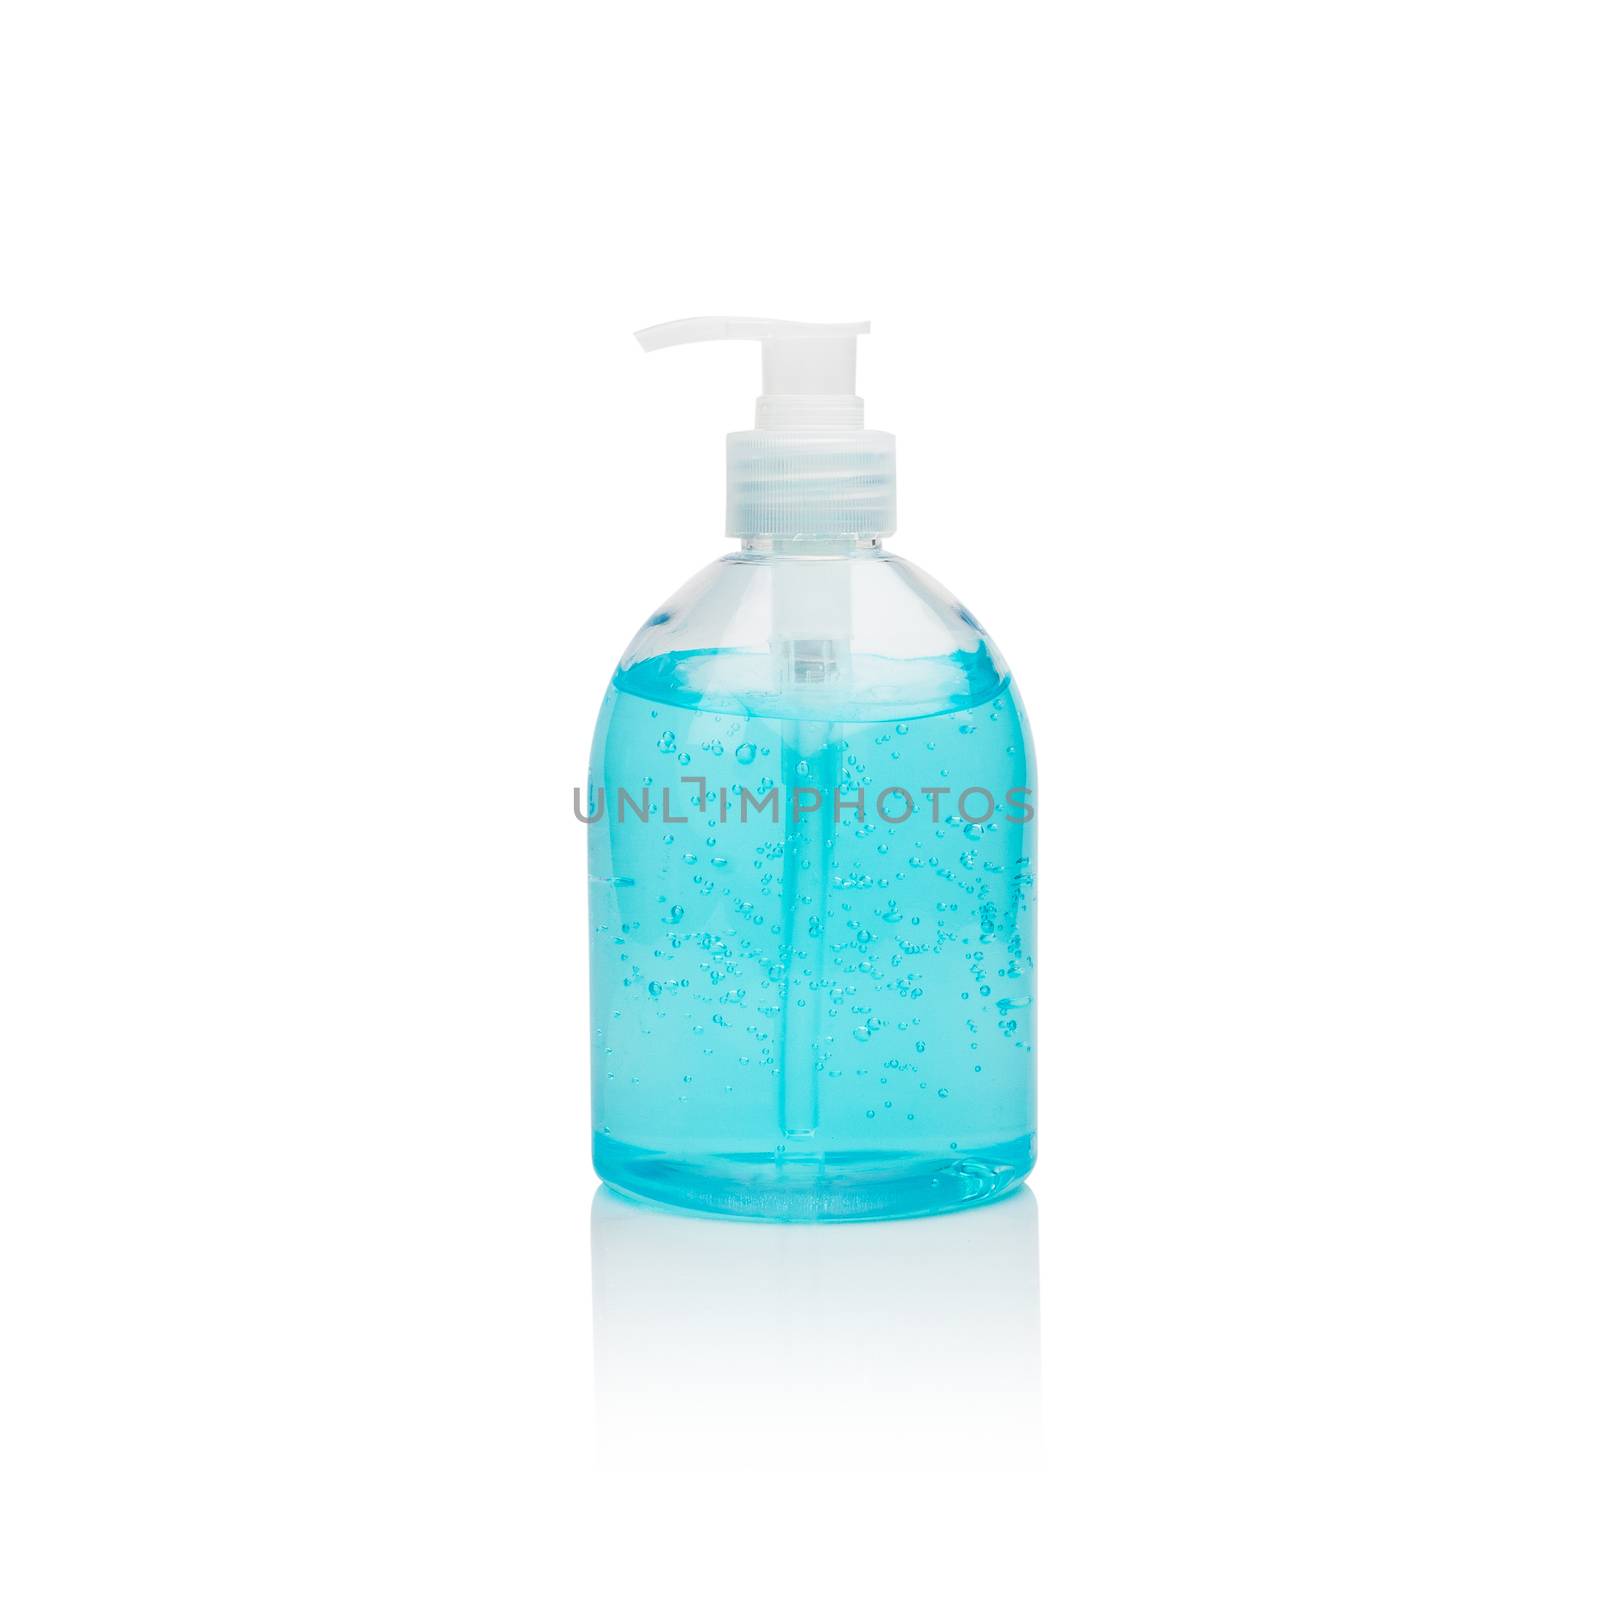 Alcohol gel sanitizer hand gel cleaners for anti bacteria and virus on white background.